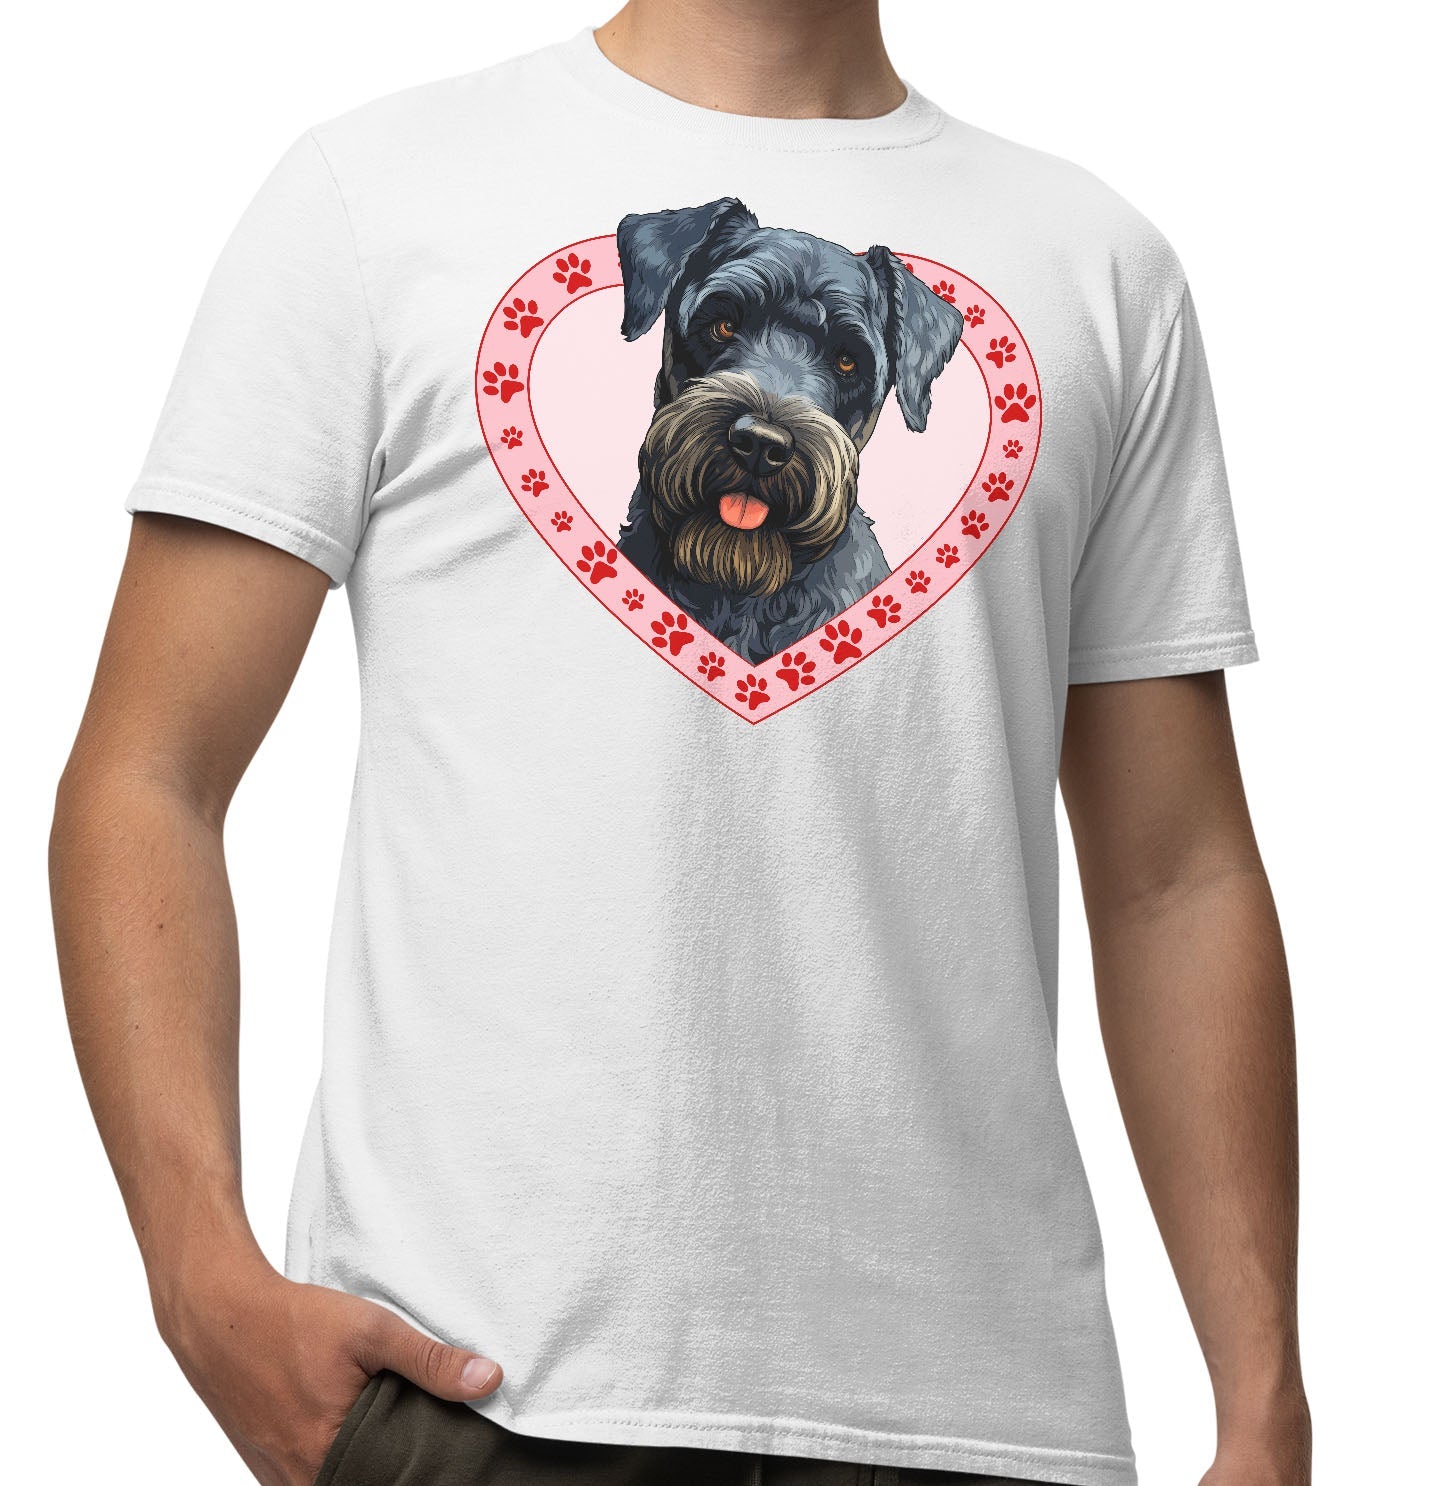 Kerry Blue Terrier Illustration In Heart - Adult Unisex T-Shirt